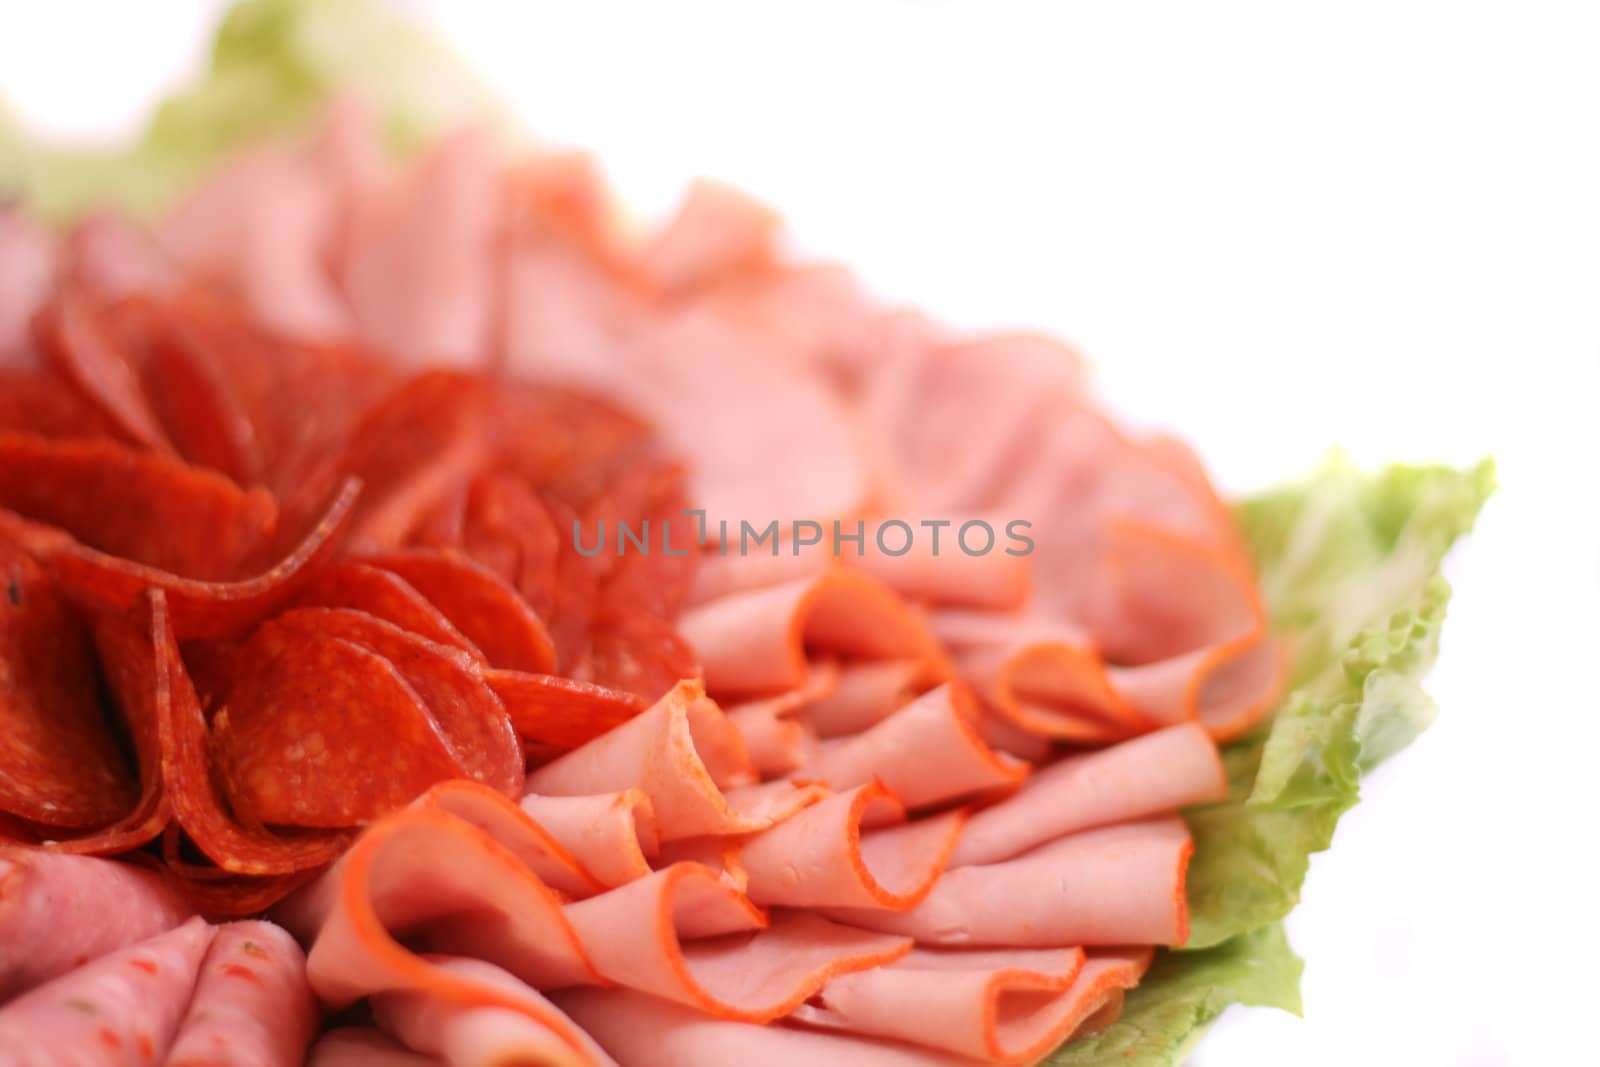 salami and lettuce on the white background